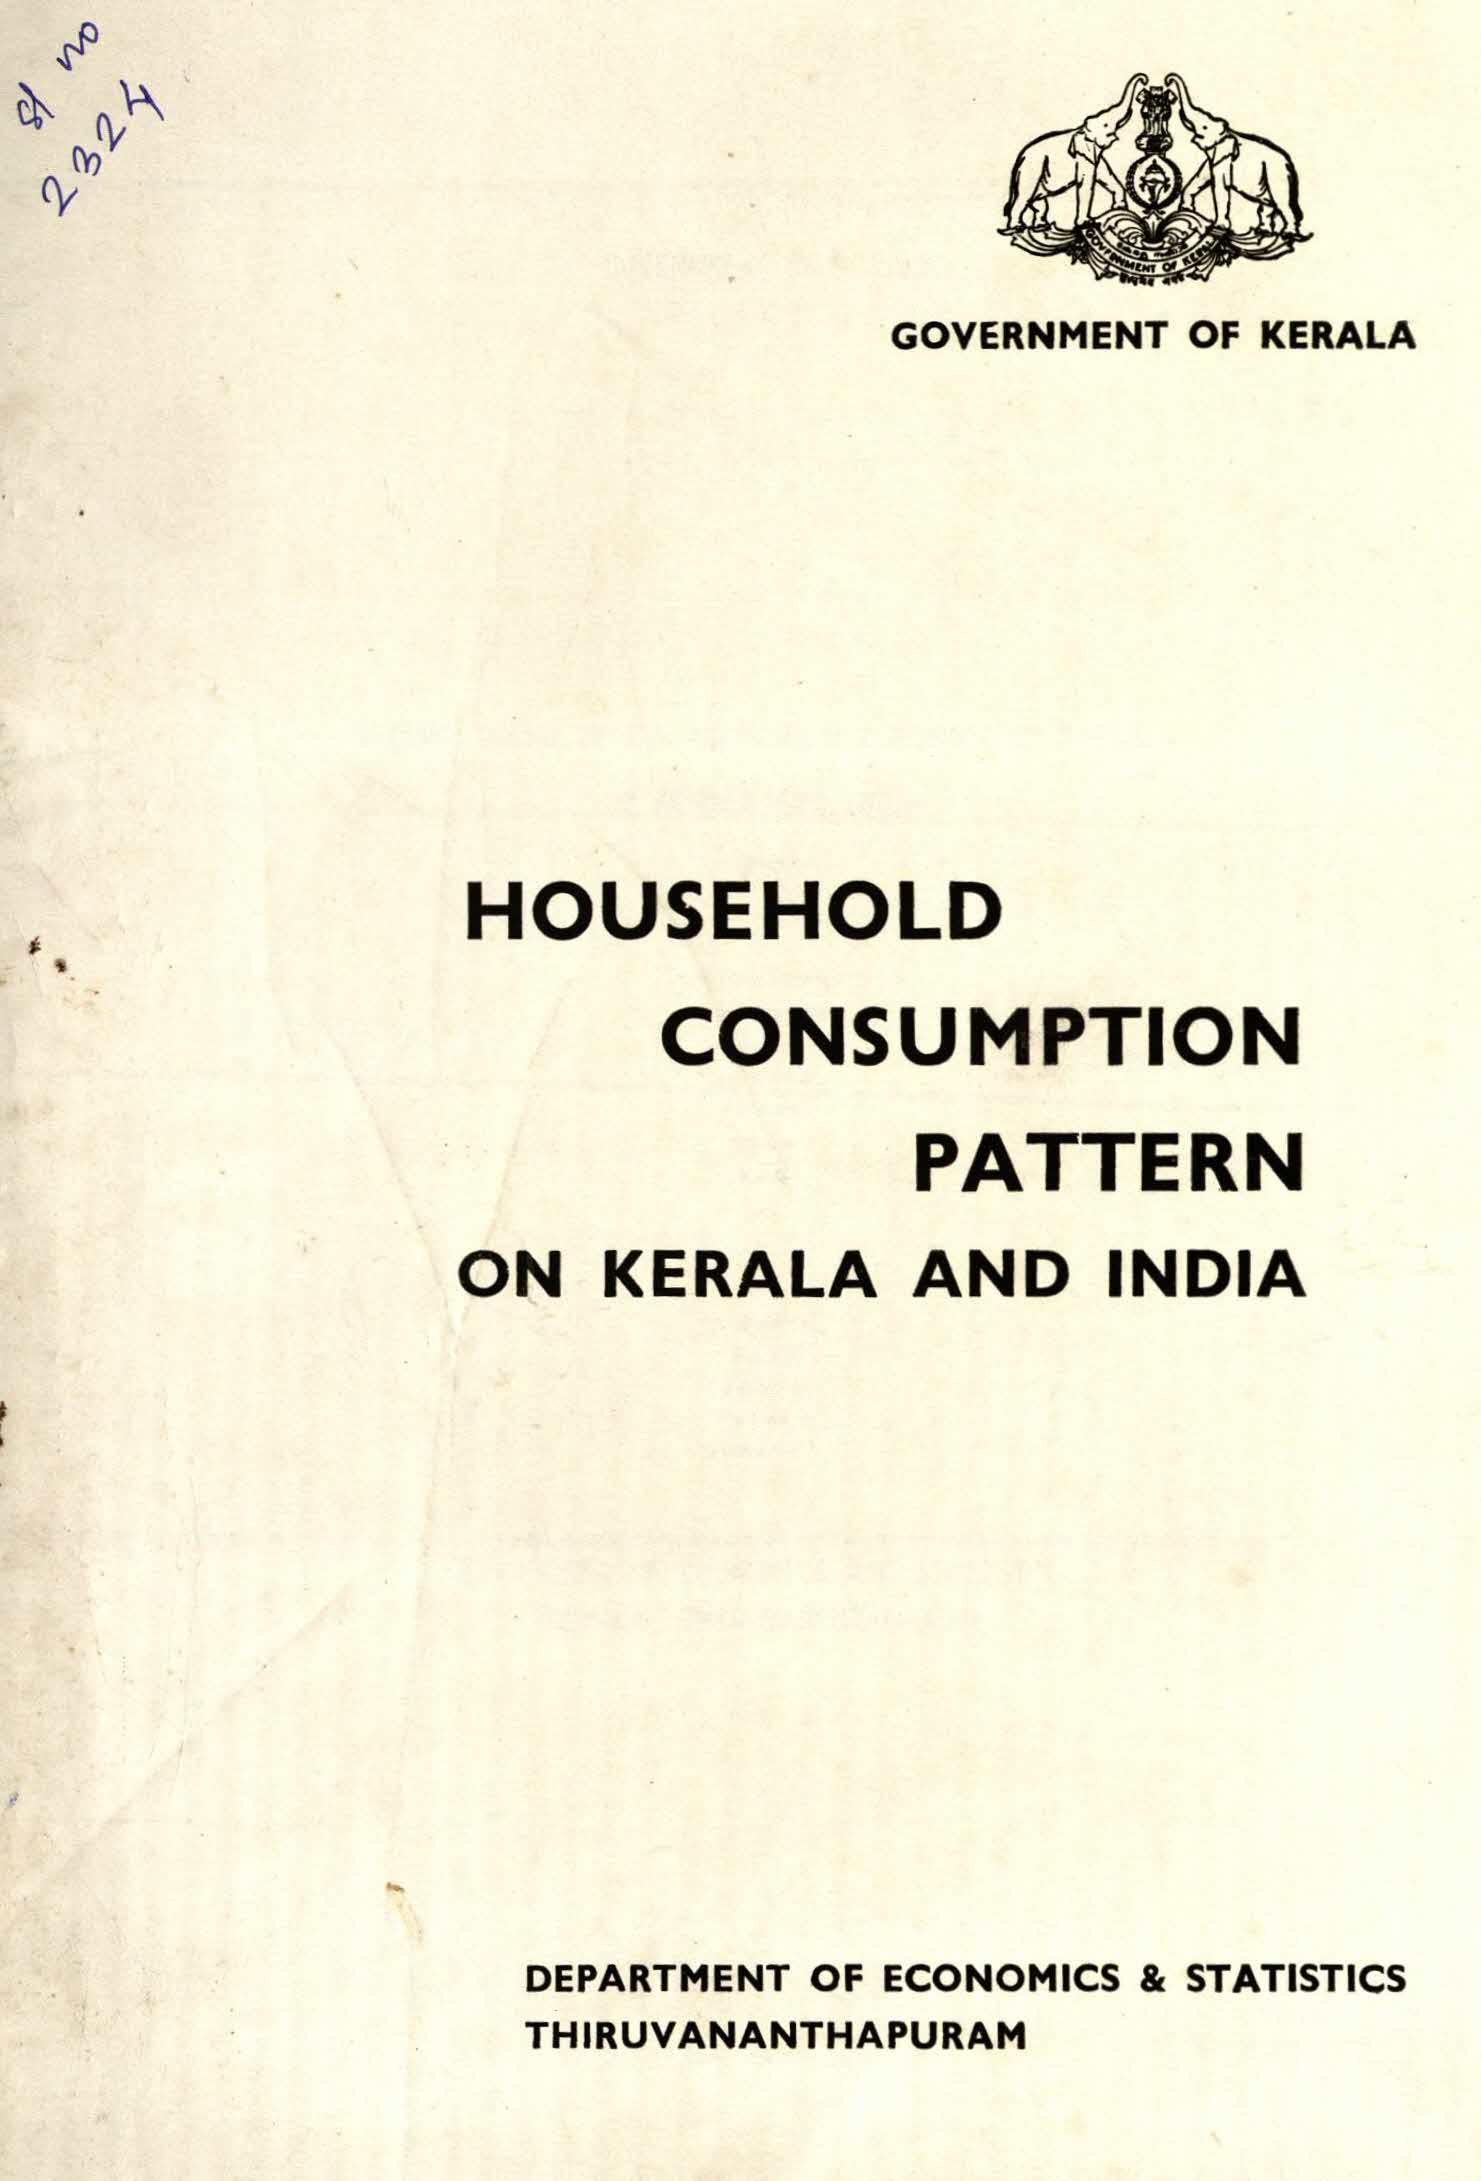 HOUSEHOLD CONSUMPTION PATTERN ON KERALA & INDIA 1996